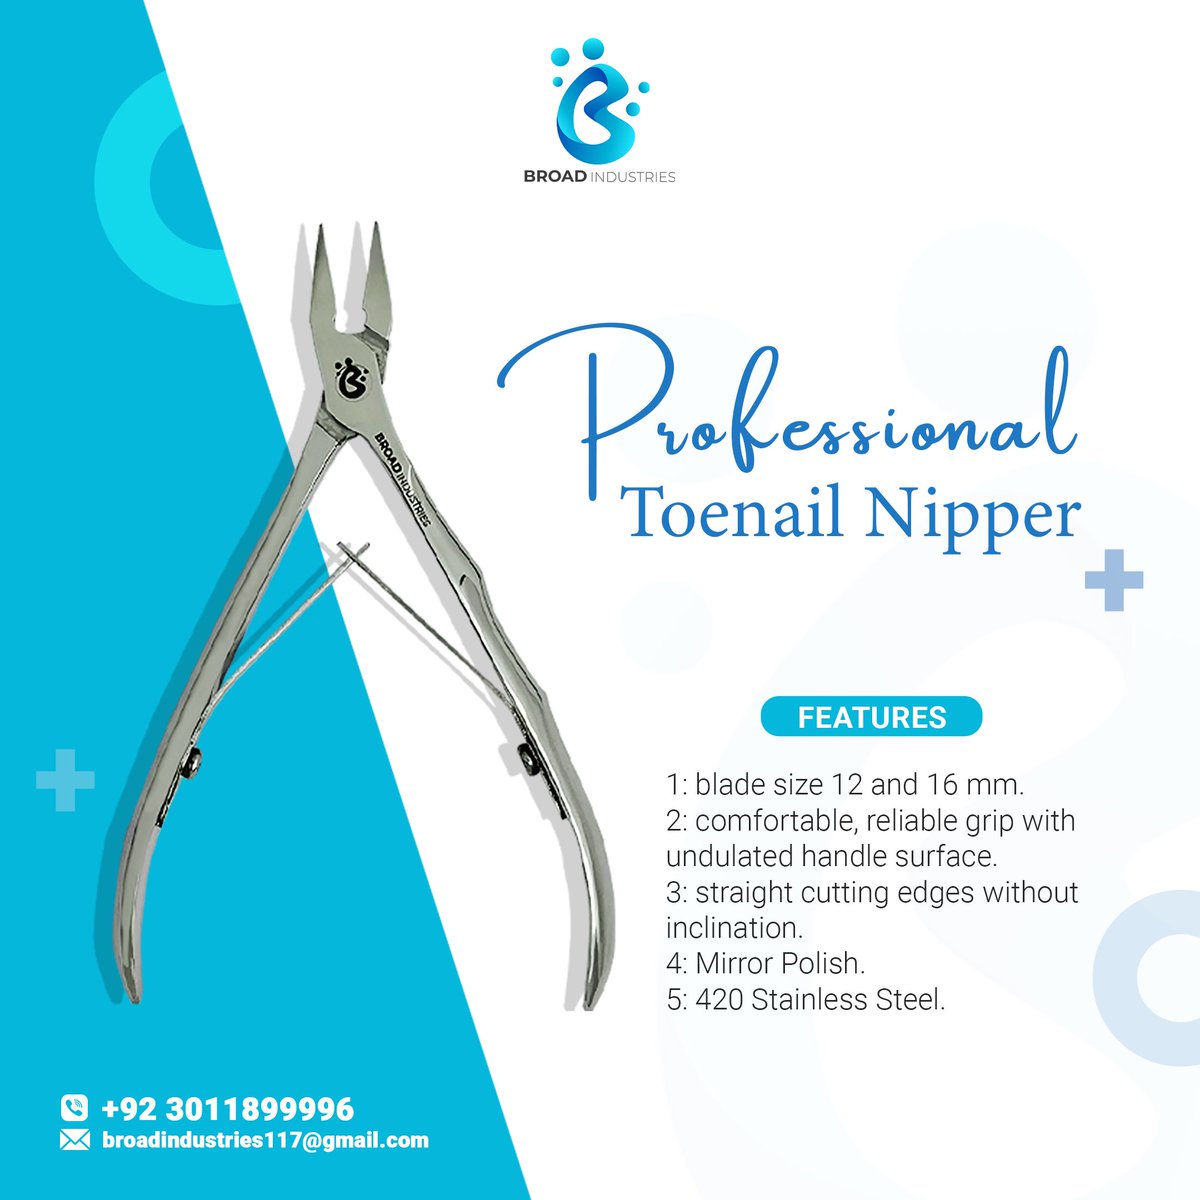 Nail cutters are used for rough  hard nails, whereas nail nippers are designed for working with softer and thinner nails.
#pedicuretools #manicuretools #manicurepedicure #nailnipper #footnail #nailfashionacademyireland #nailcutter #nailtools #nailclippers #nailart #footcare